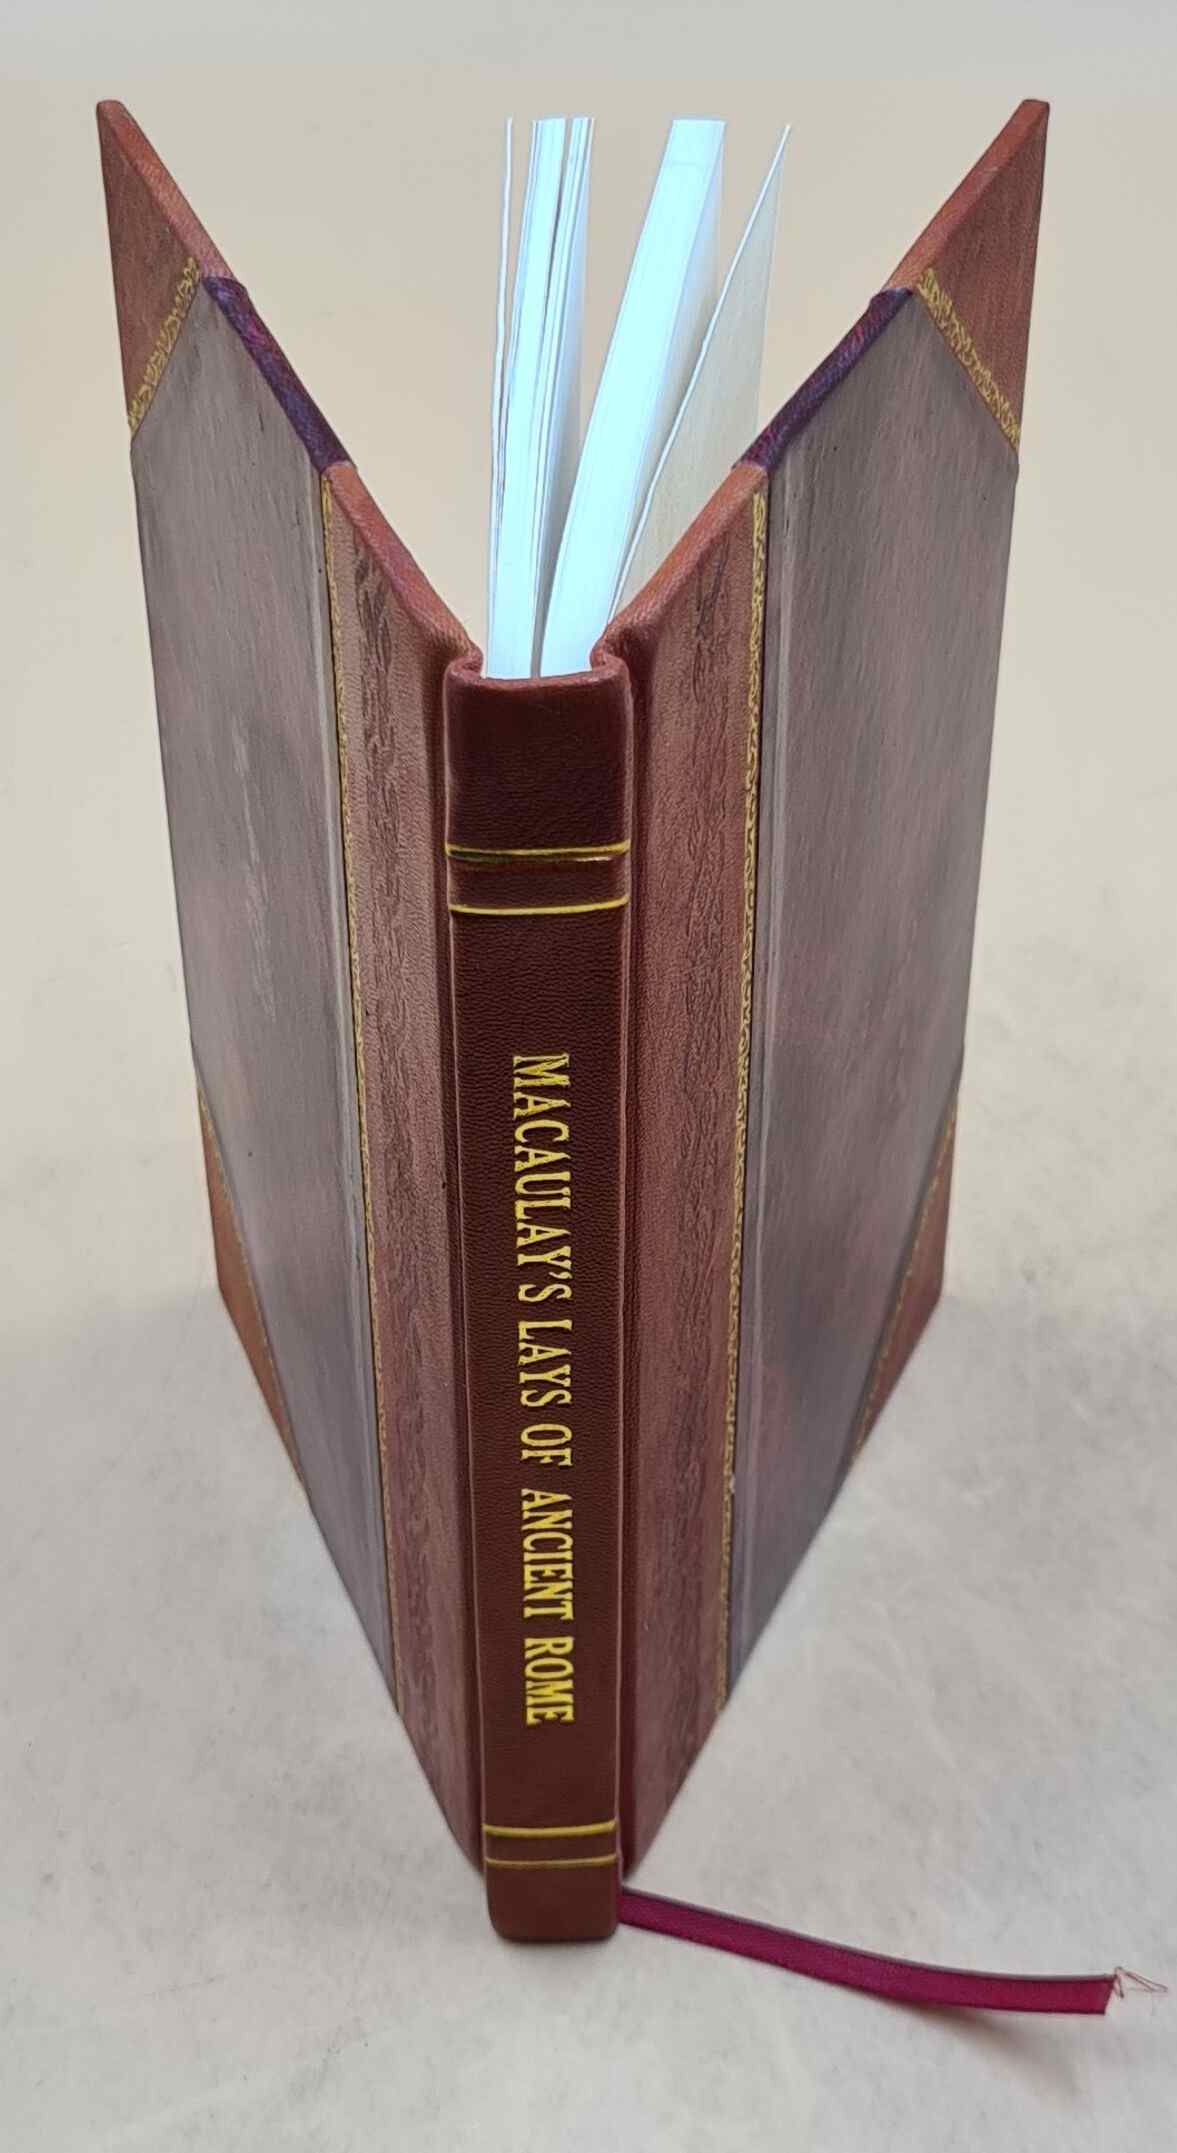 Macaulay's Lays of Ancient Rome 1899 [Leather Bound]